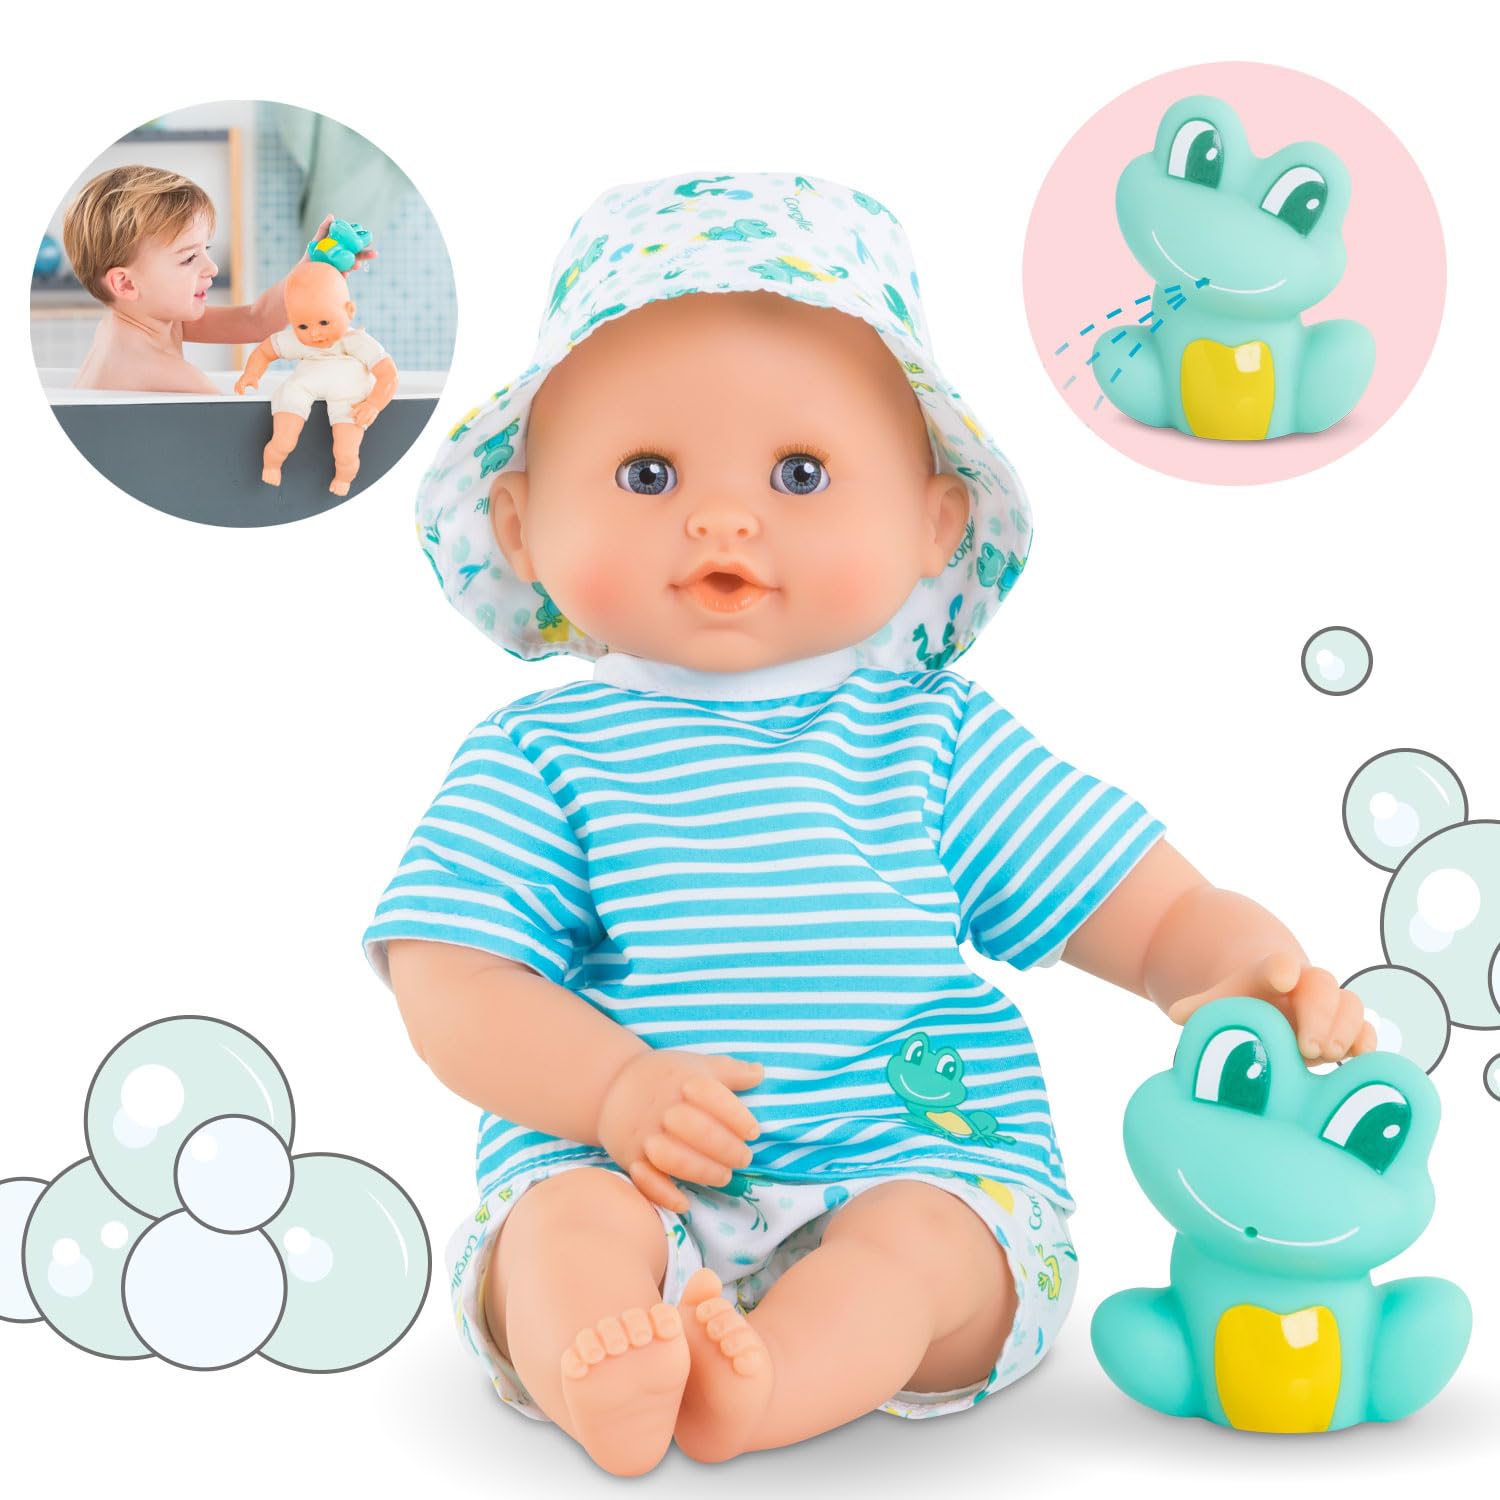 Corolle Bebe Bath Marin - 12” Boy Baby Doll with Rubber Frog Toy, Safe for Water Play in The Bathtub or Pool, Poseable Soft Body with Vanilla Scent, for Kids Ages 18 Months and Up, Aqua